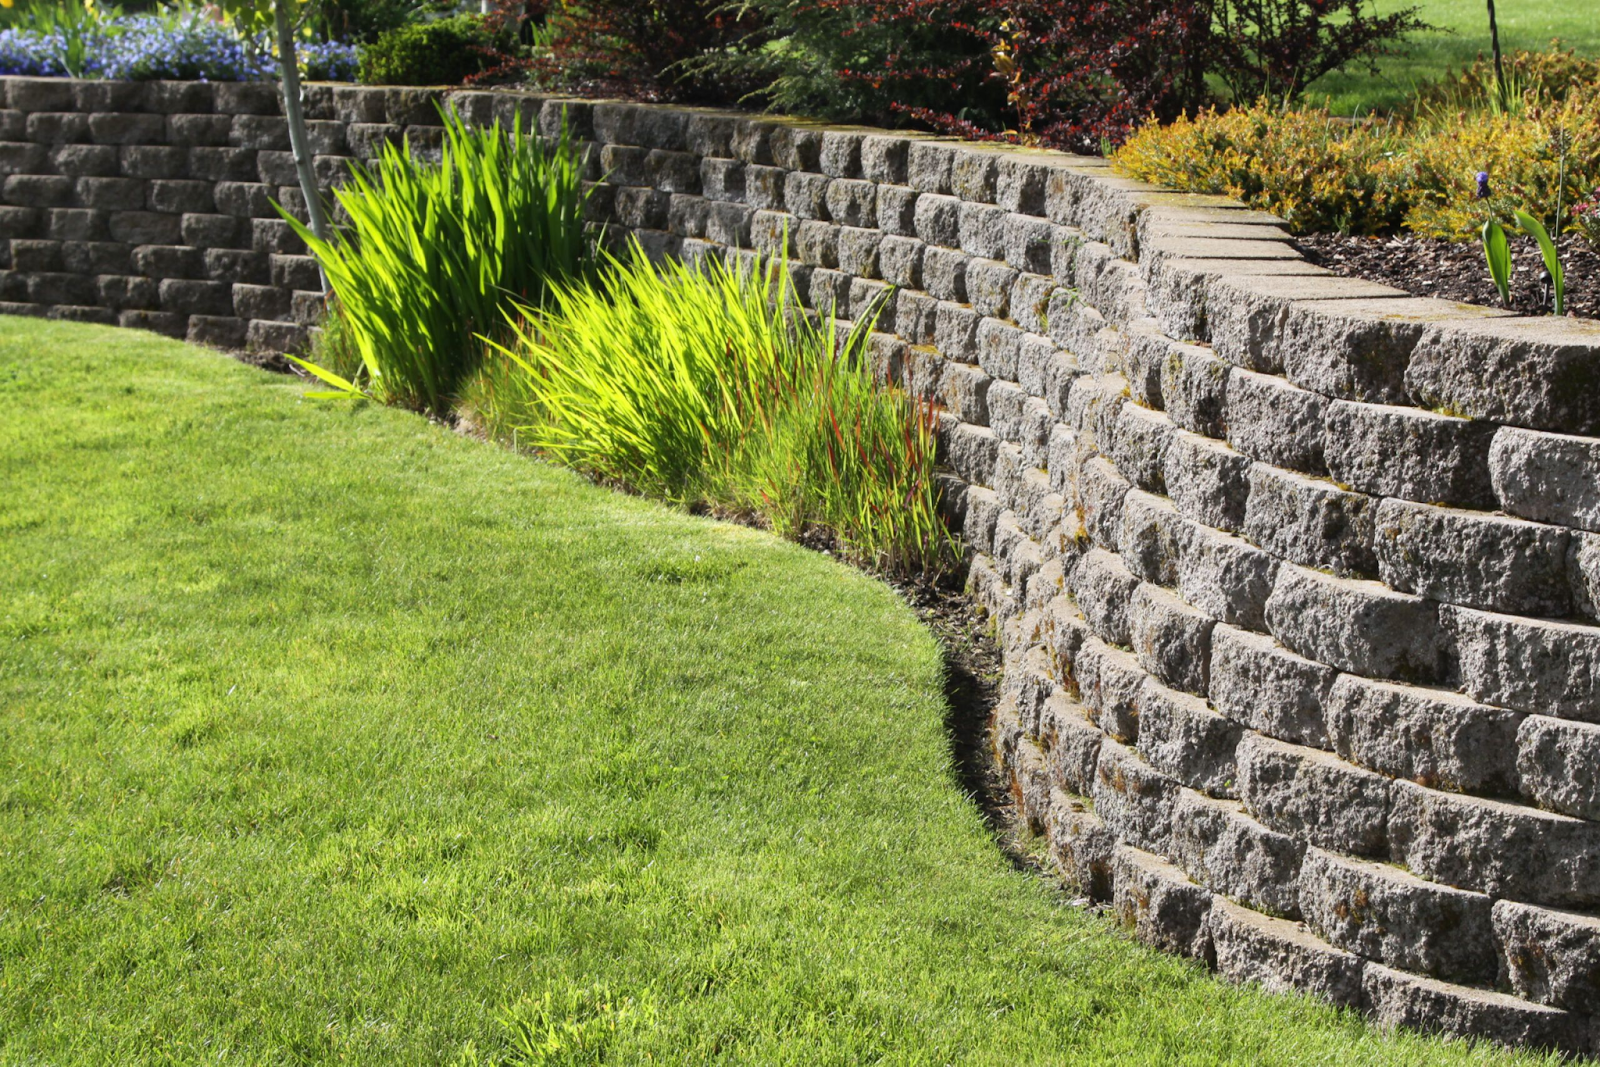 Retaining Wall in Landscaping design.